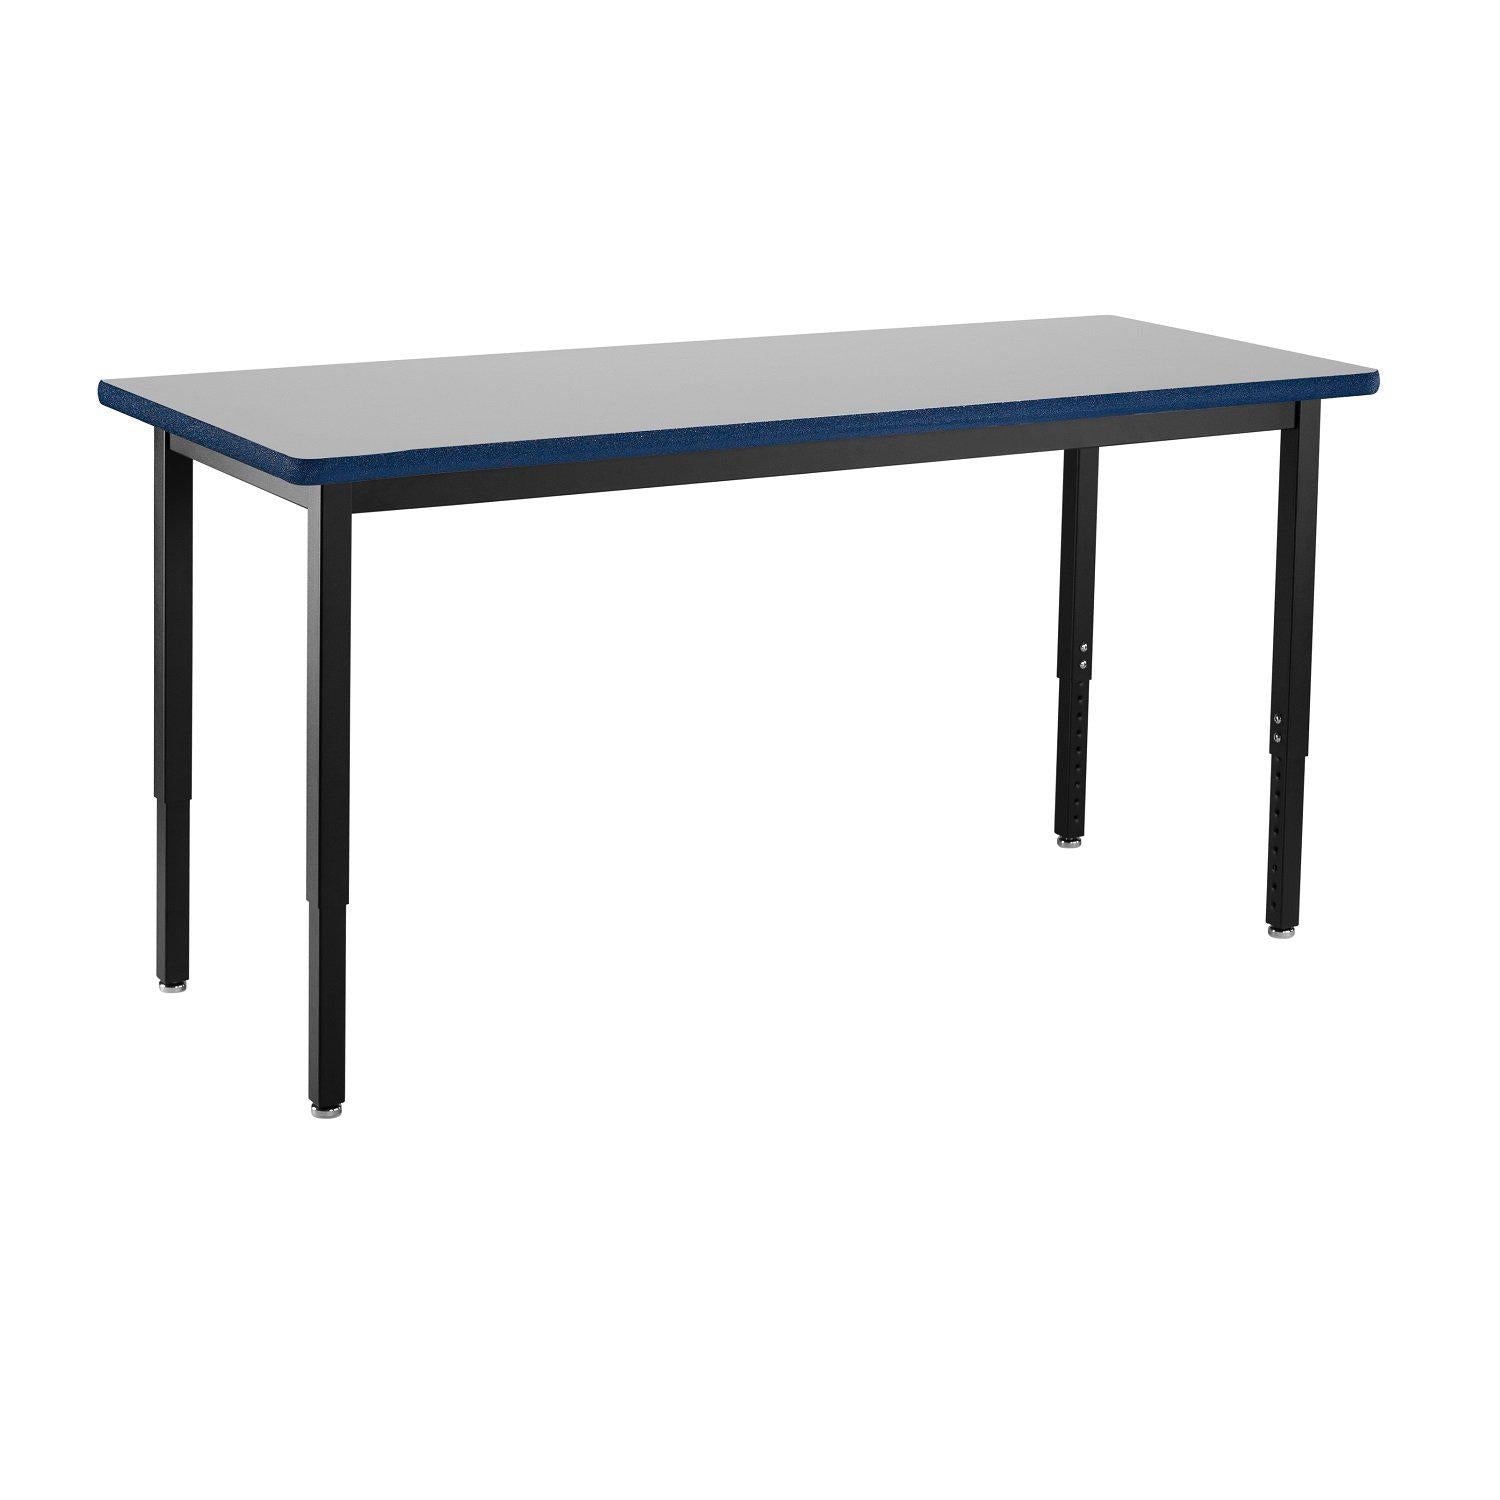 Heavy-Duty Height-Adjustable Utility Table, Black Frame, 30" x 60", Supreme High-Pressure Laminate Top with Black ProtectEdge